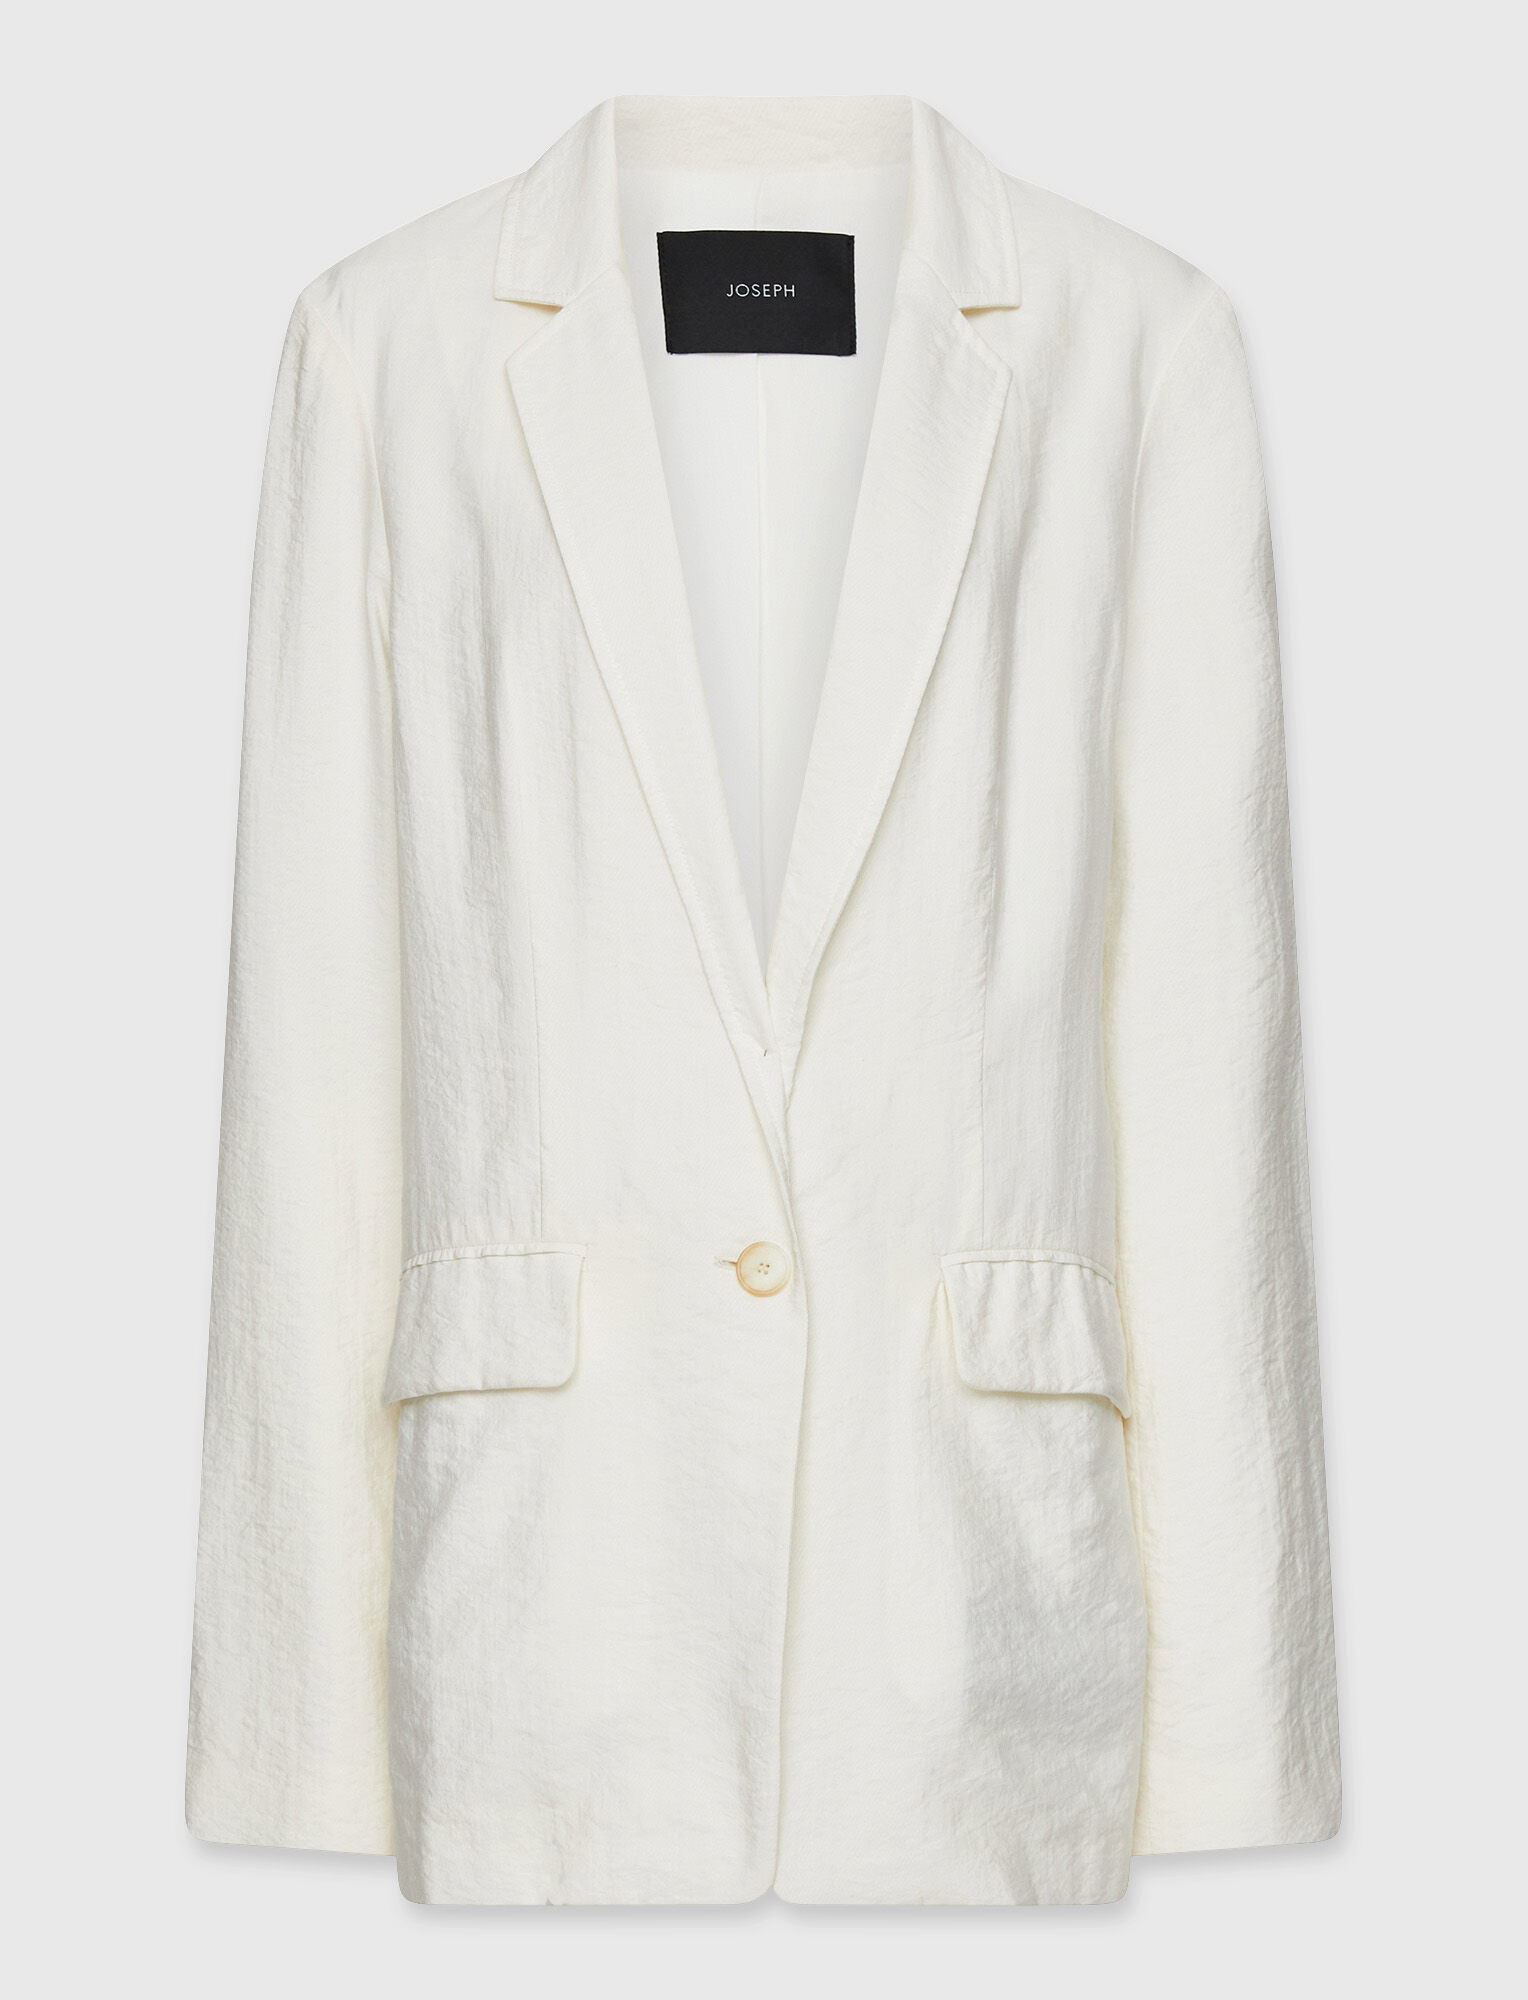 Joseph, Textured Twill Lawrence Jacket, in Ivory